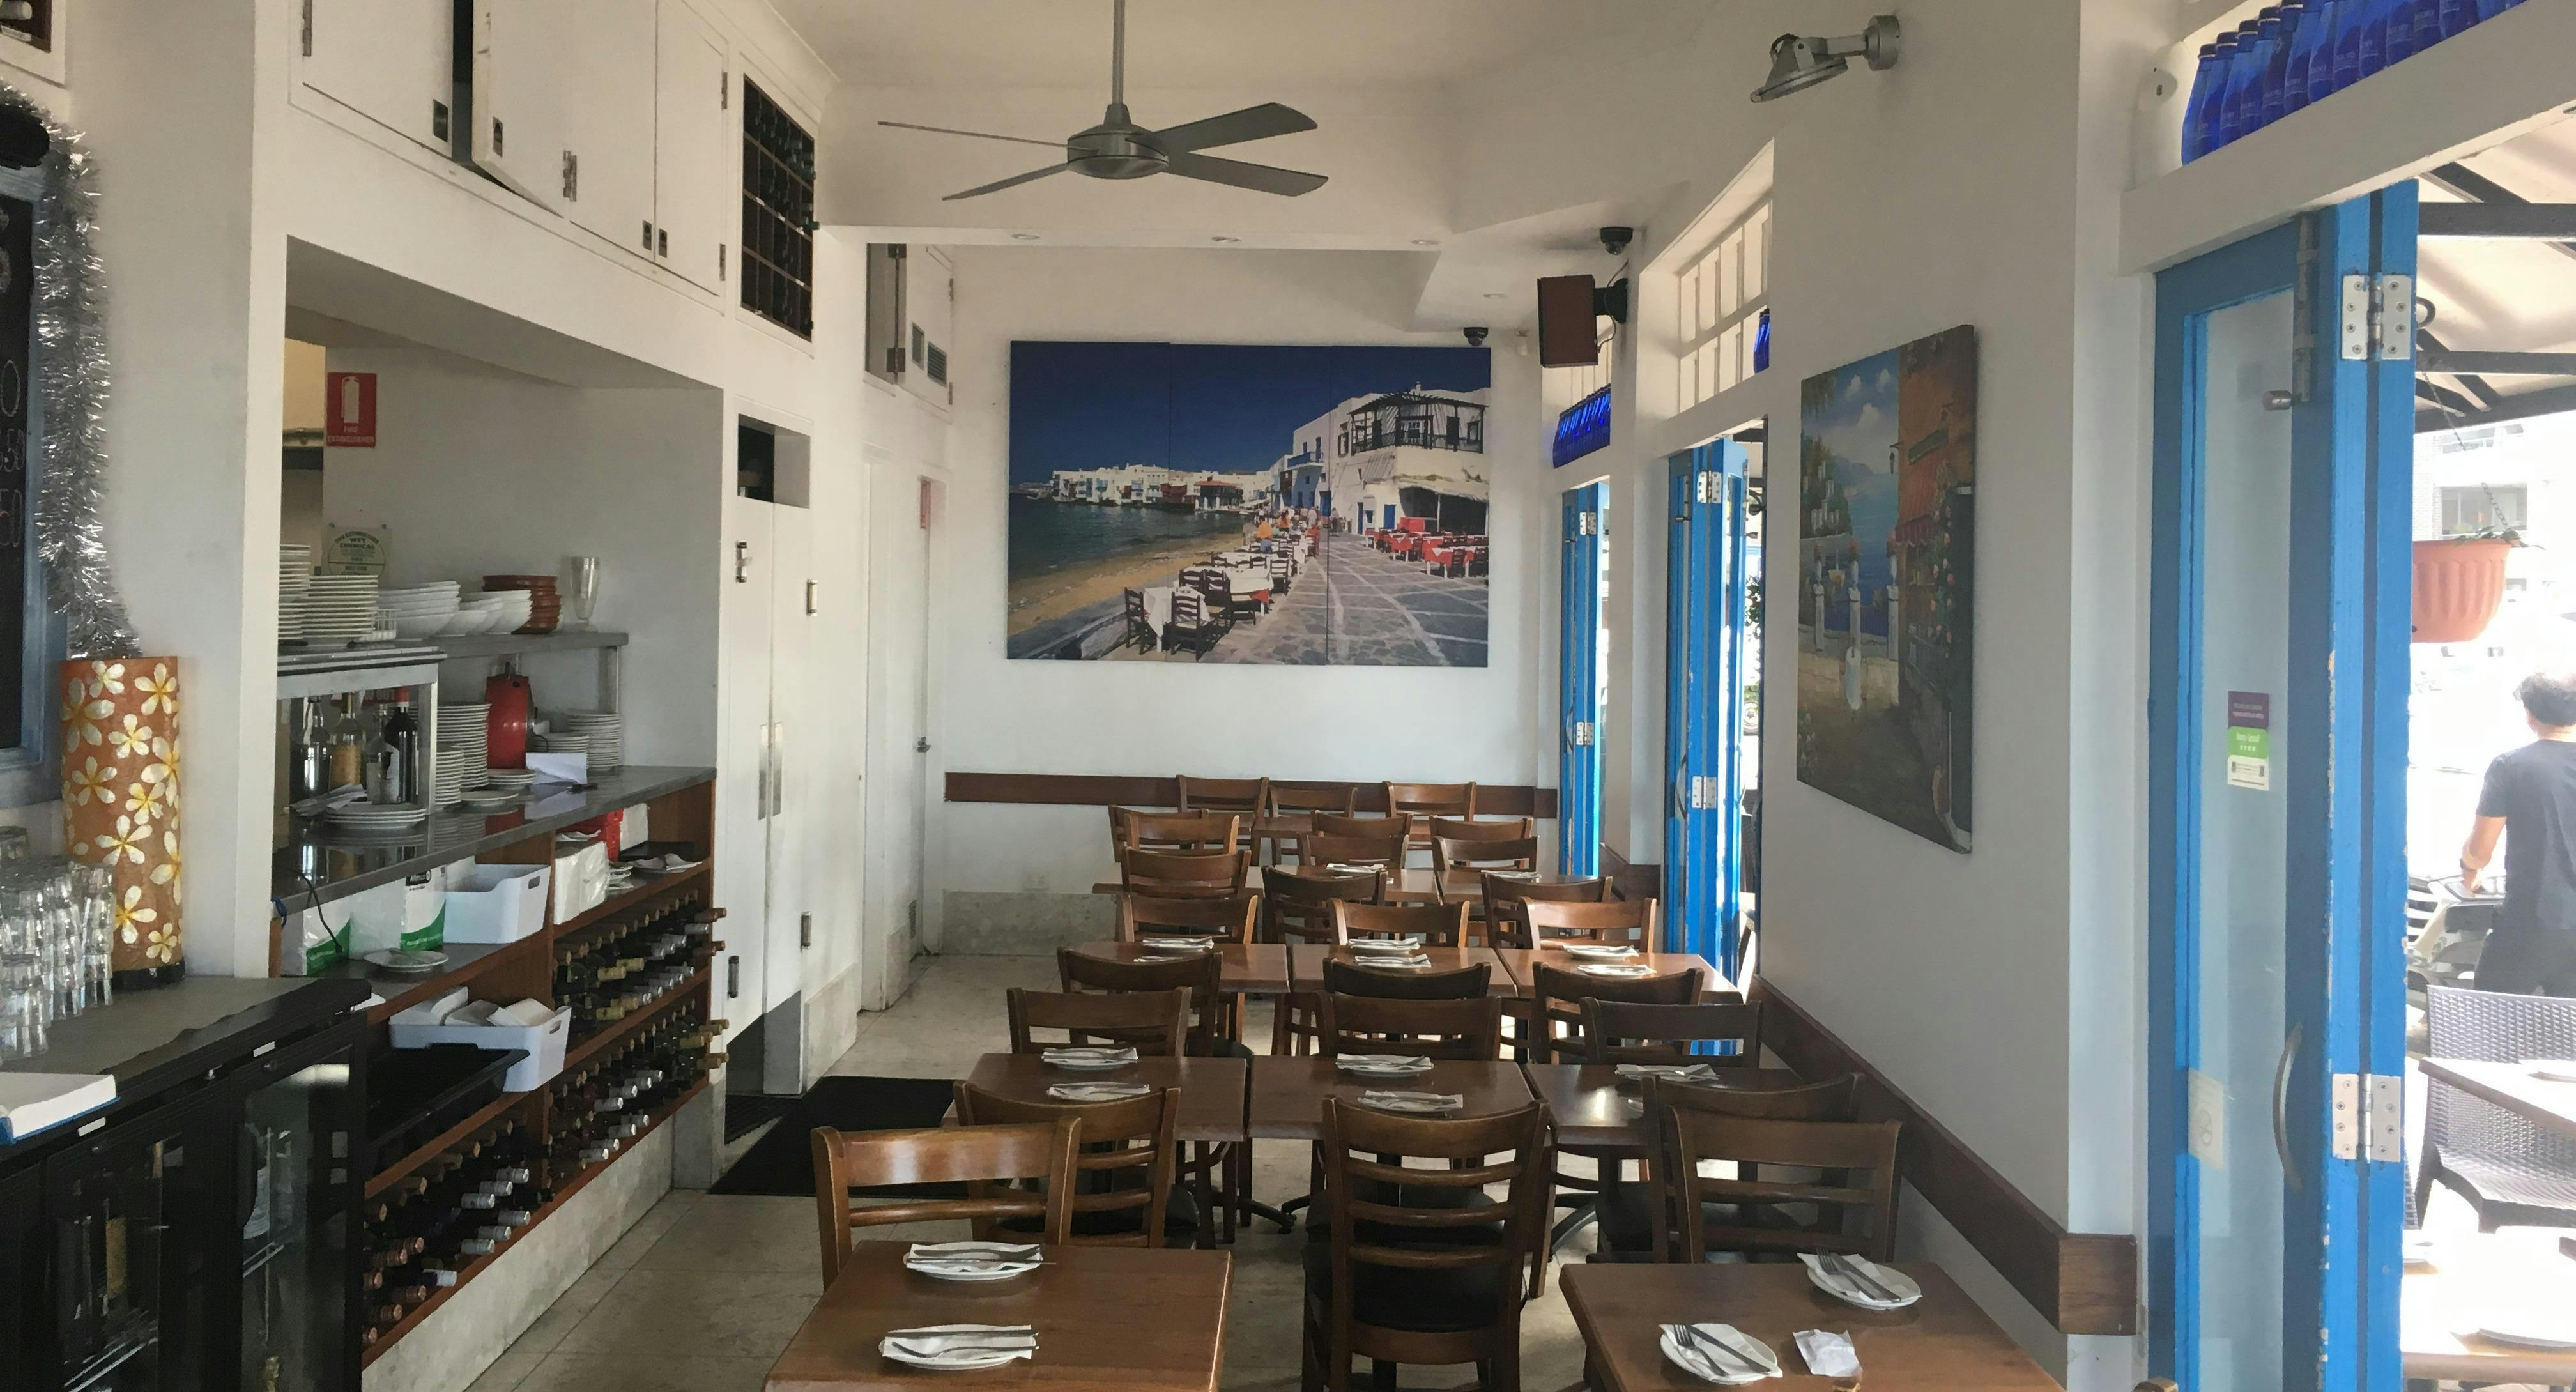 Photo of restaurant Terracotta Ouzeria in Manly, Sydney